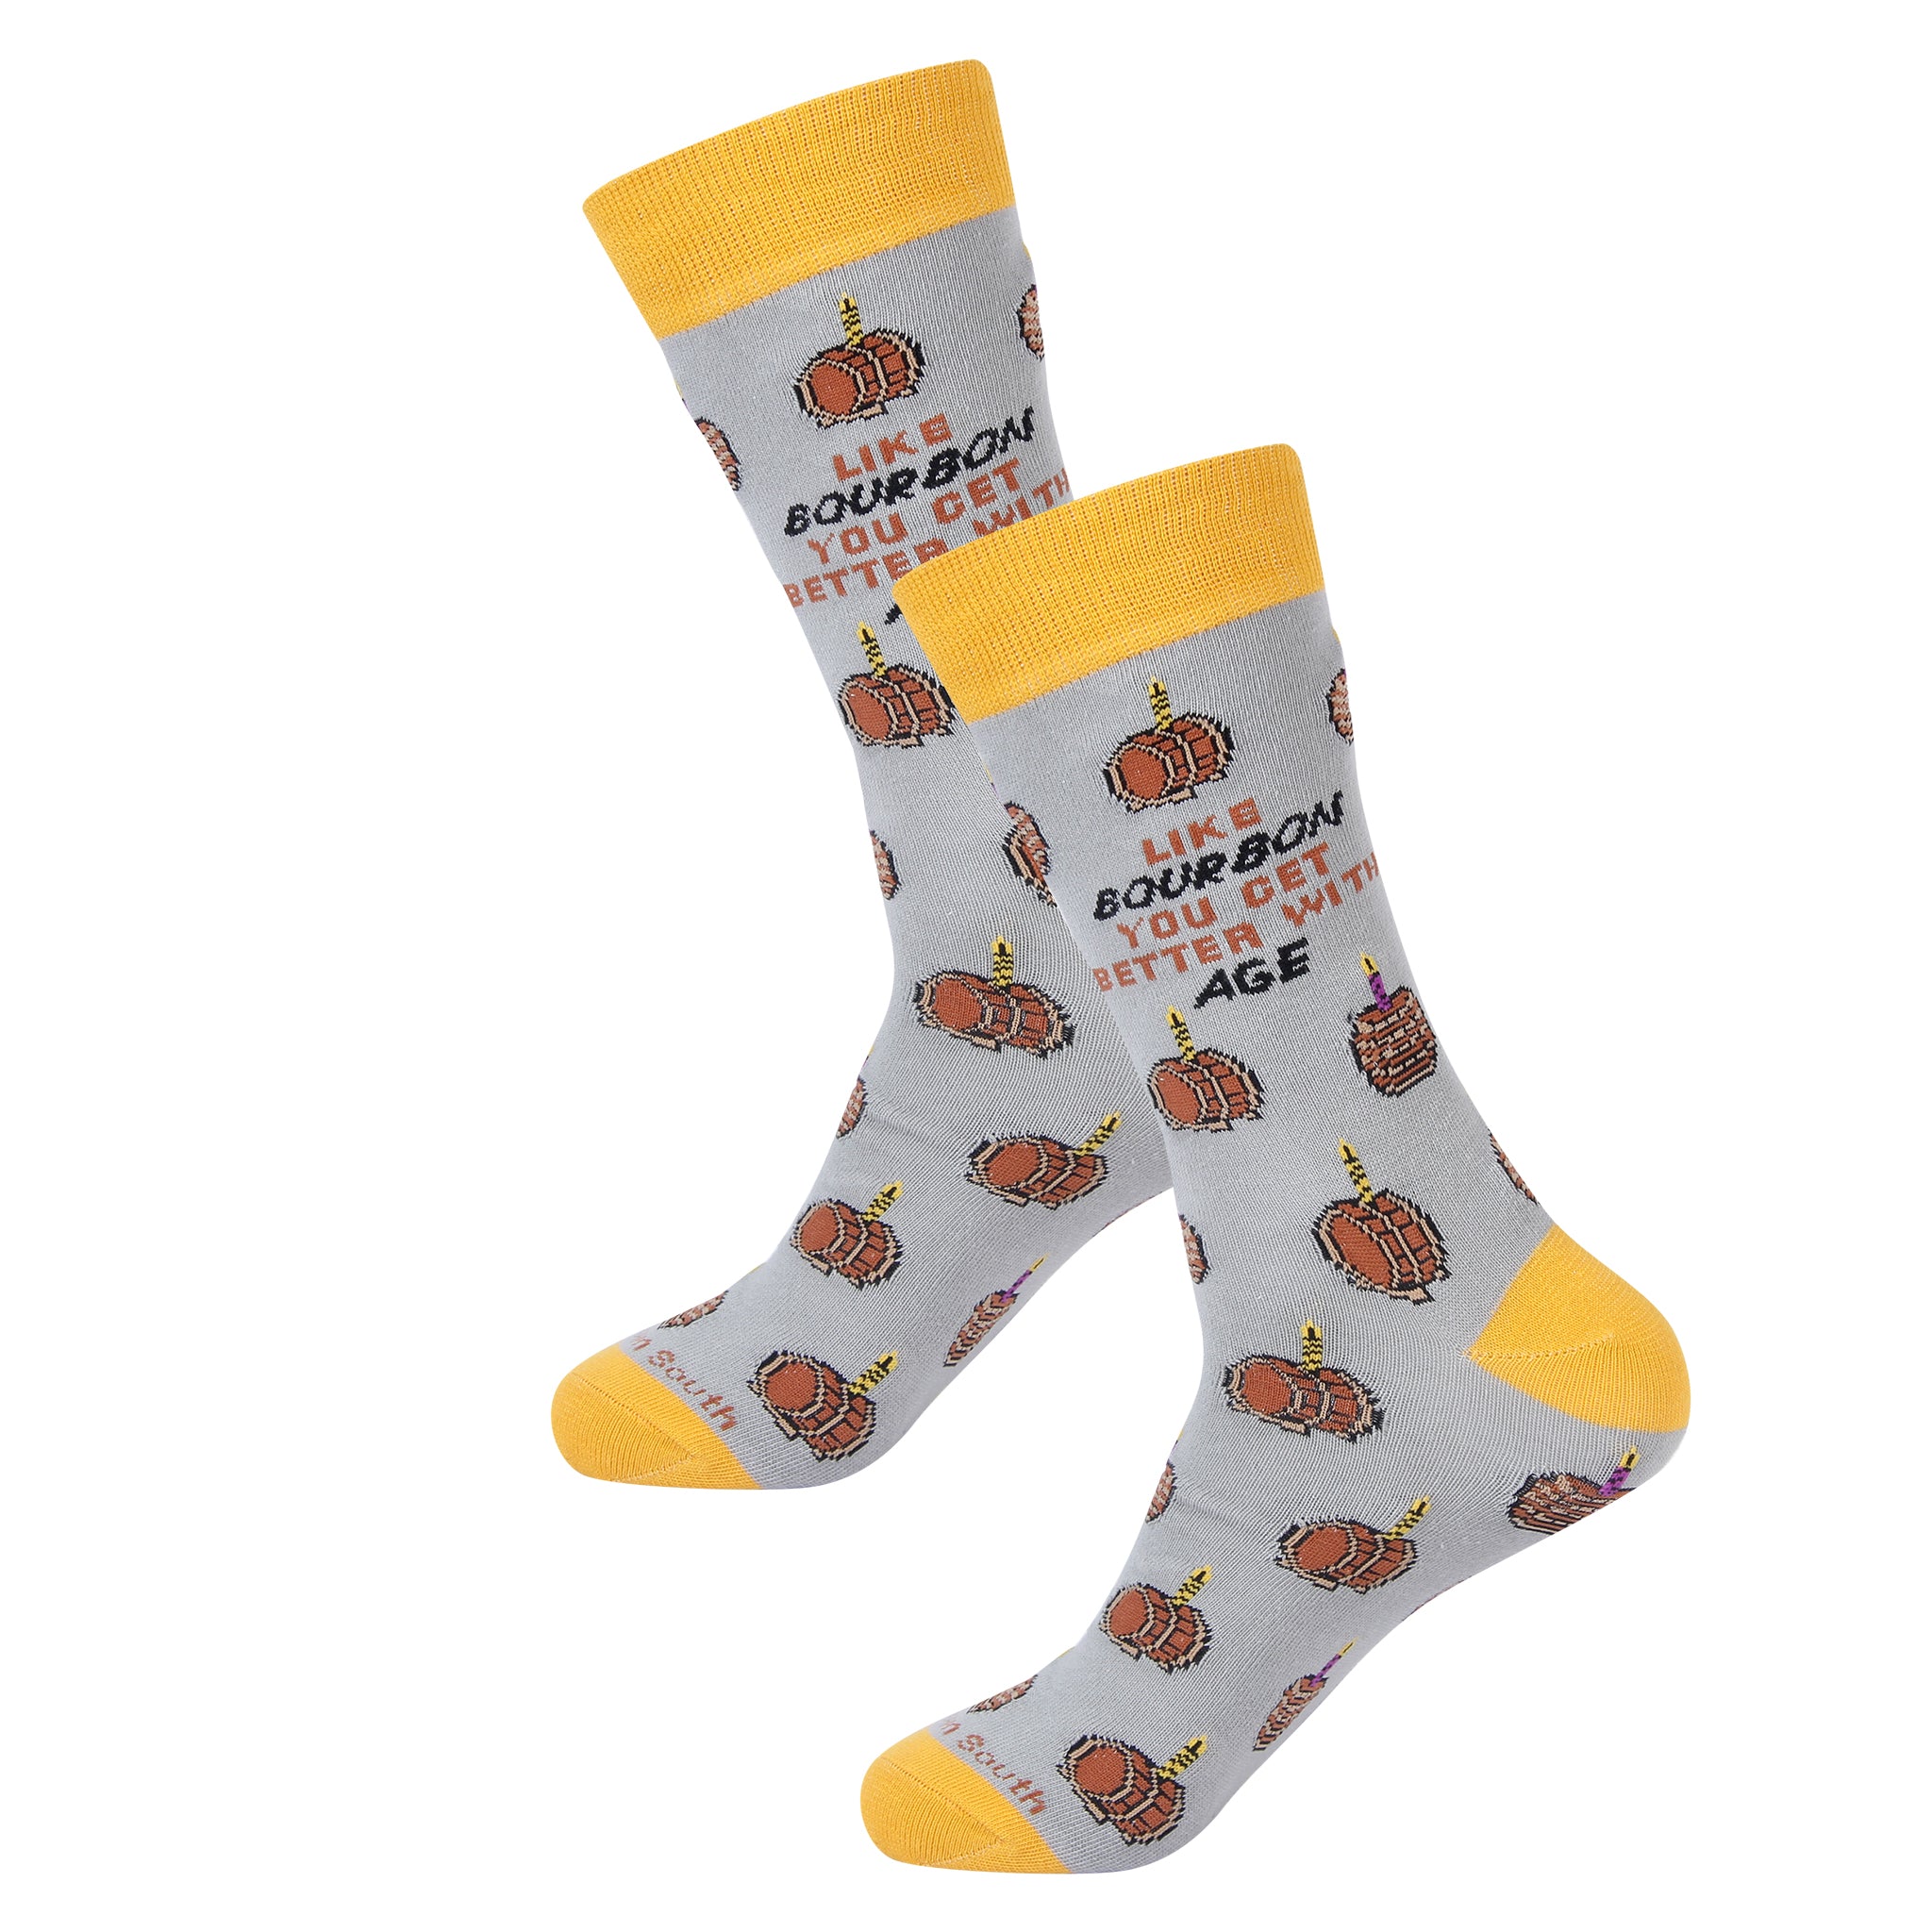 Like Bourbon You Get Better With Age Socks